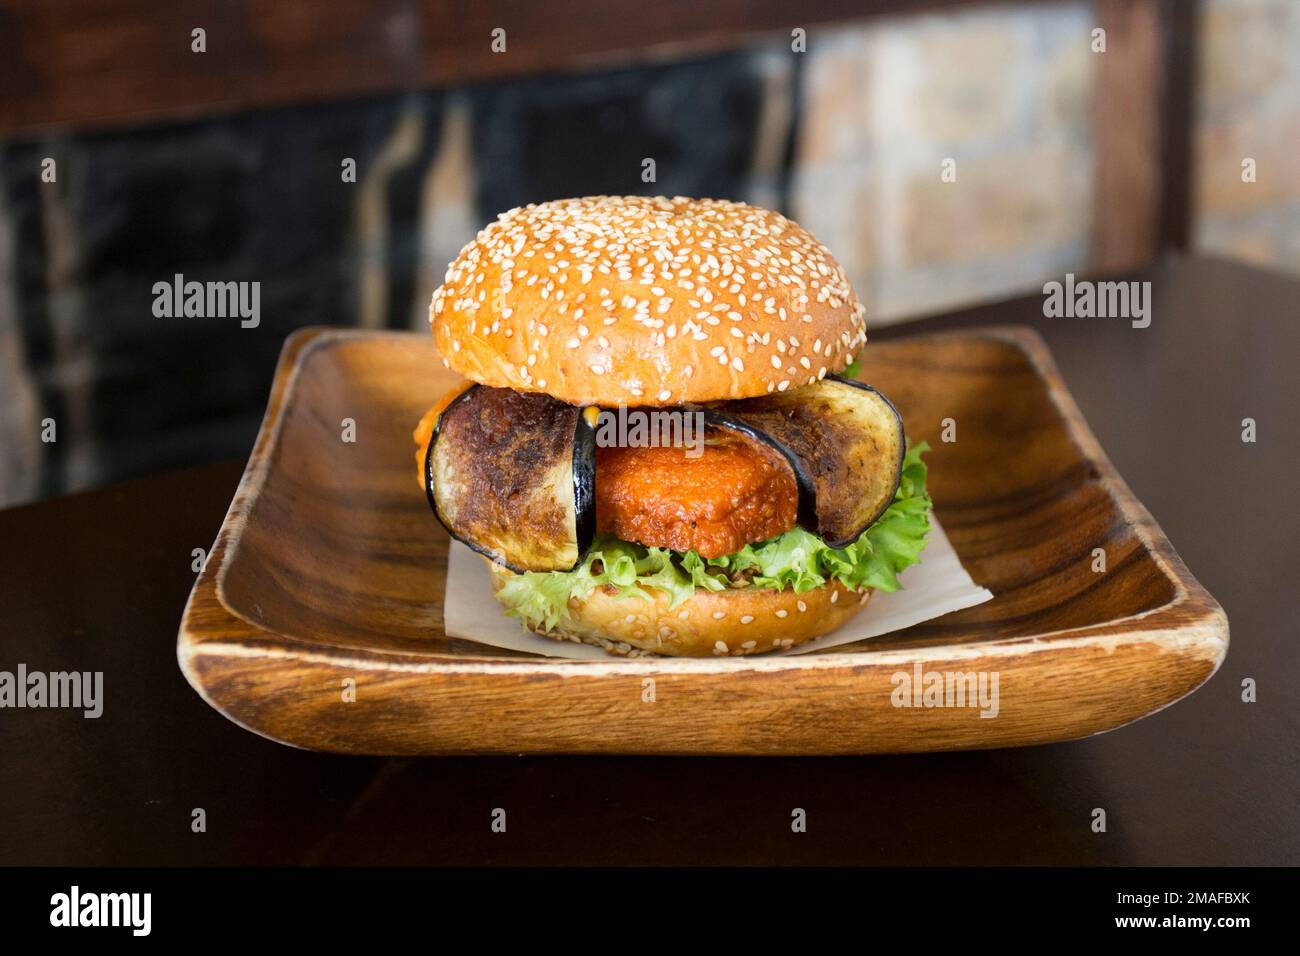 Vegetarian burger made with a mixture of vegetables and products such as tofu or seitan. Stock Photo